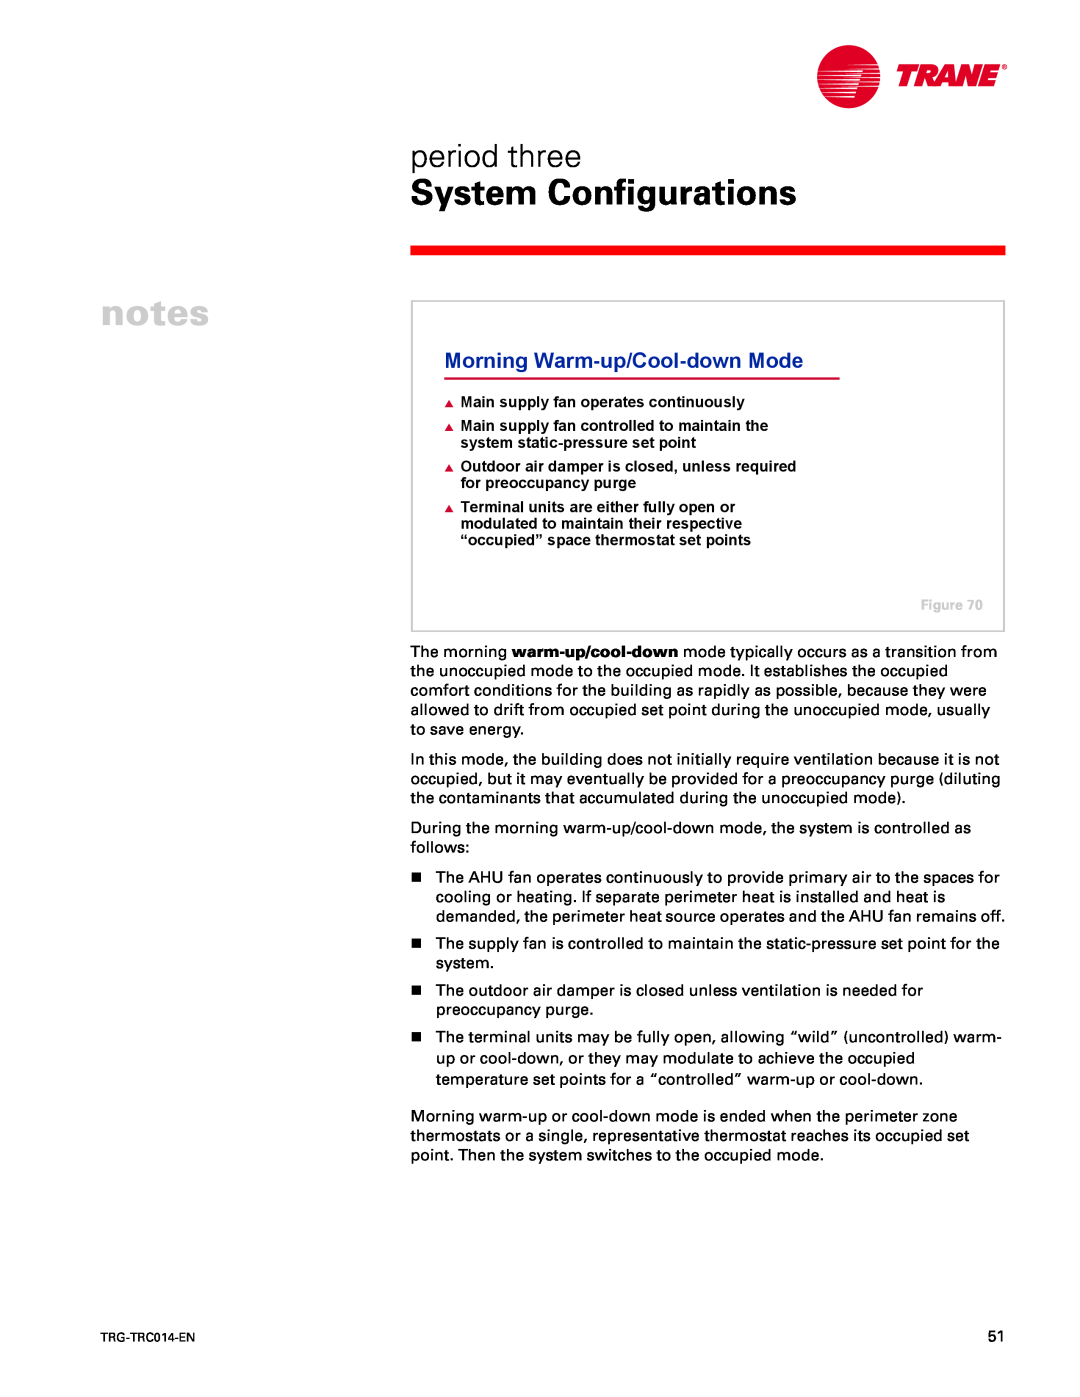 Trane TRG-TRC014-EN manual Morning Warm-up/Cool-downMode, System Configurations, period three 